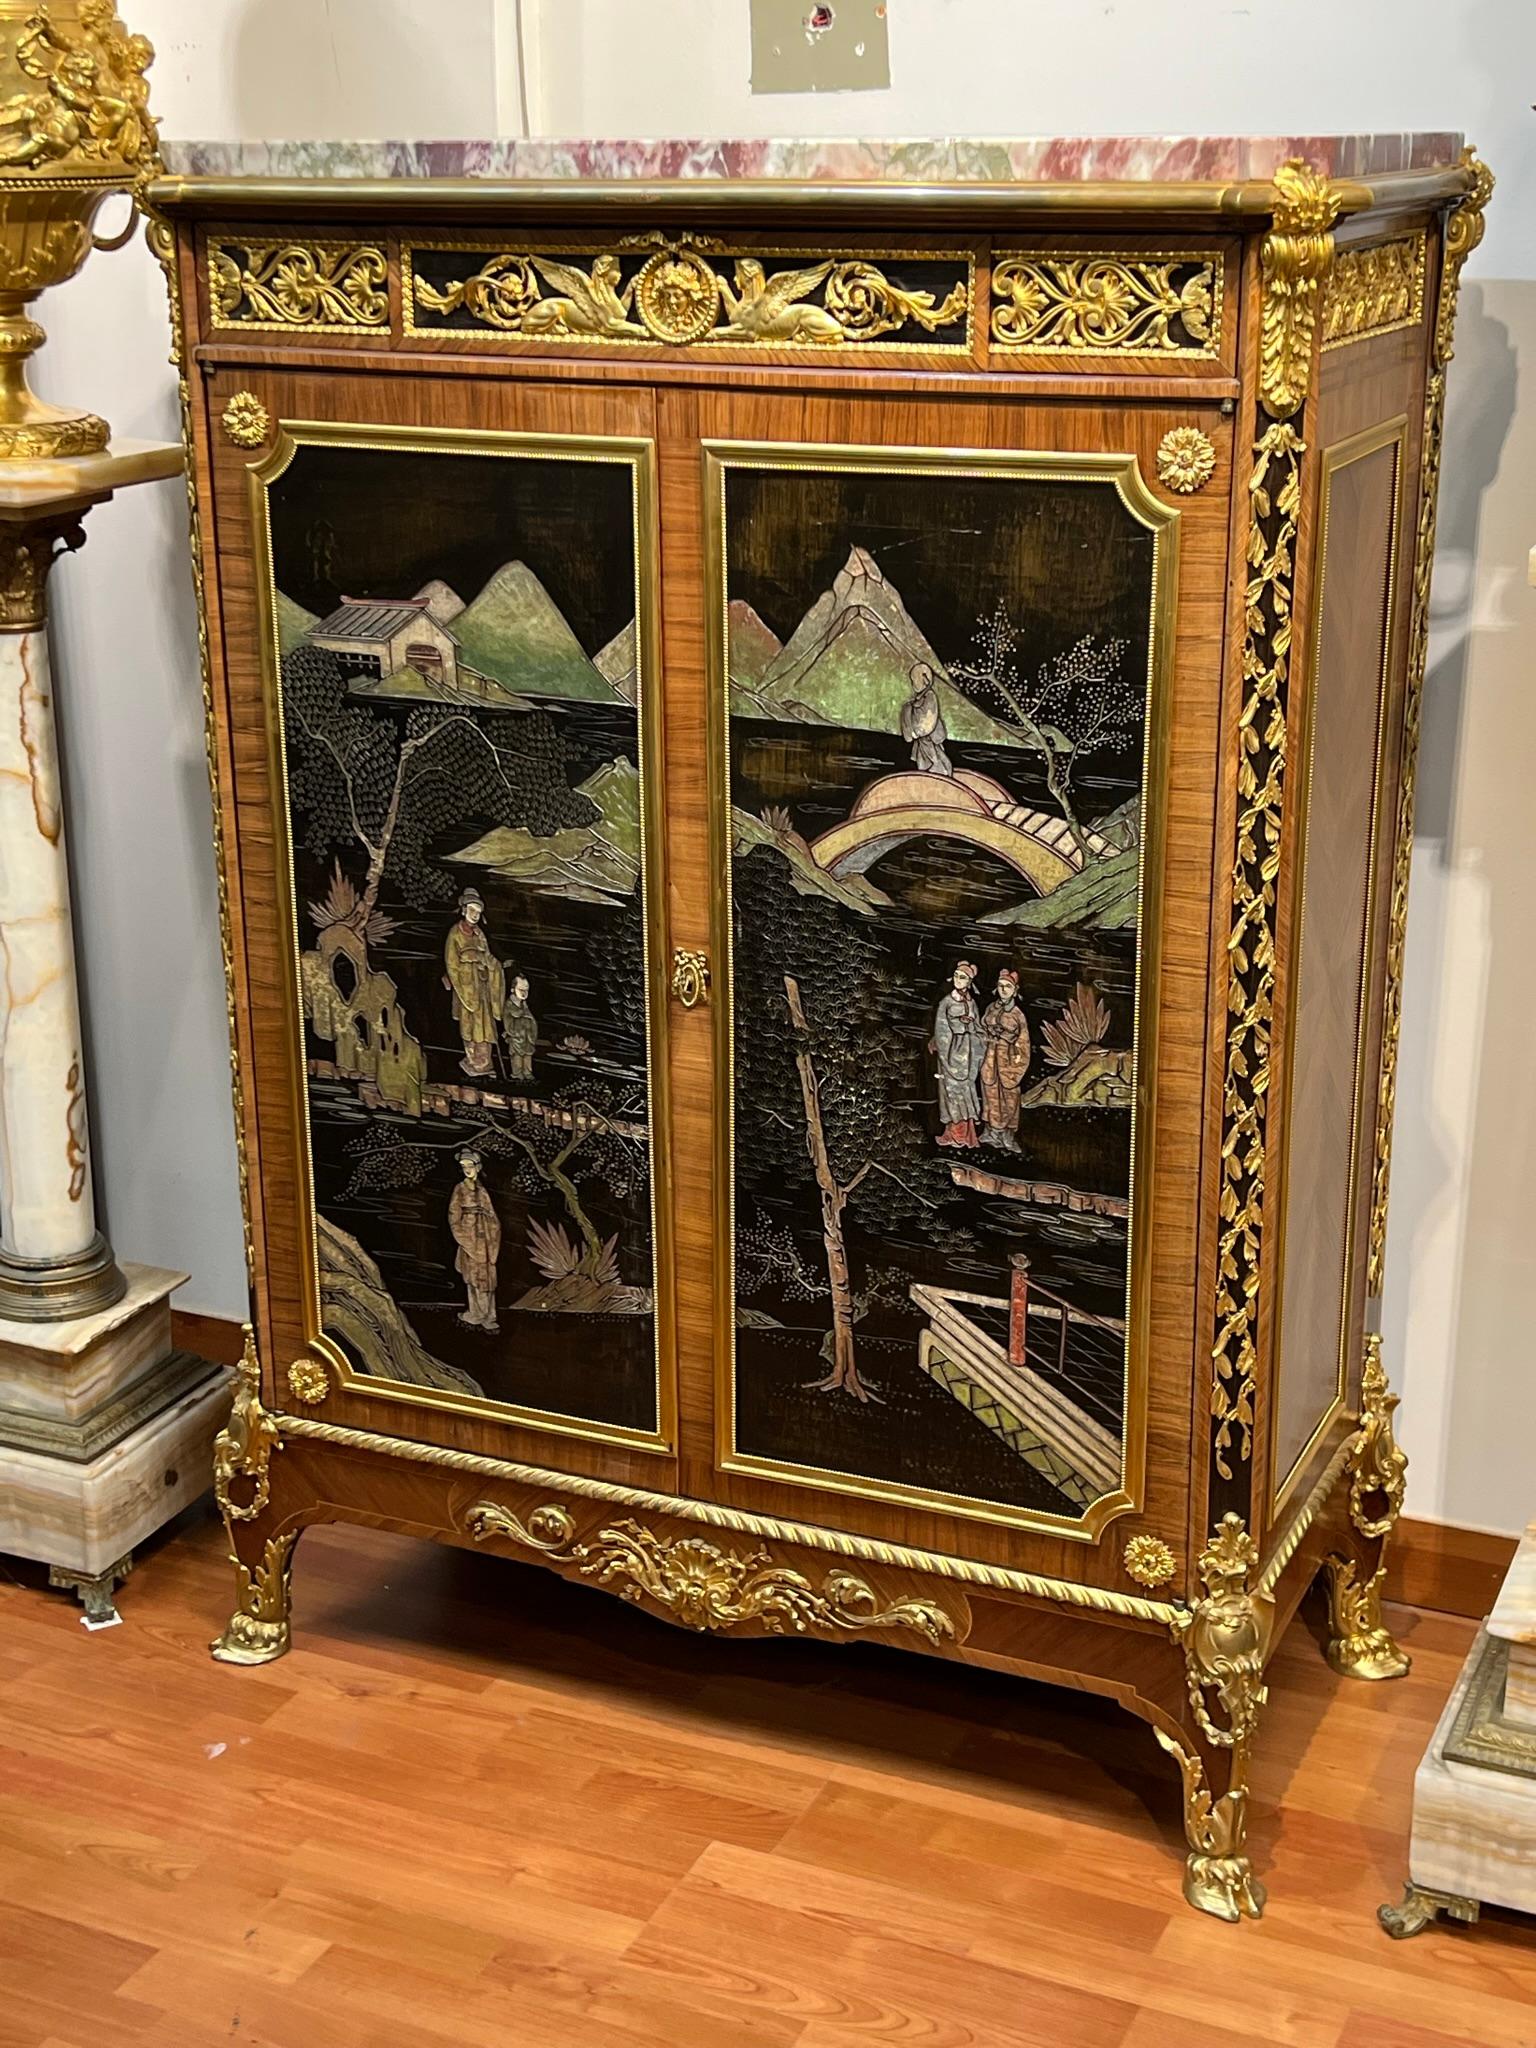 Gilt French Chinoiserie Side Cabinet in Louis XVI Style with Coromandel Panels c1900